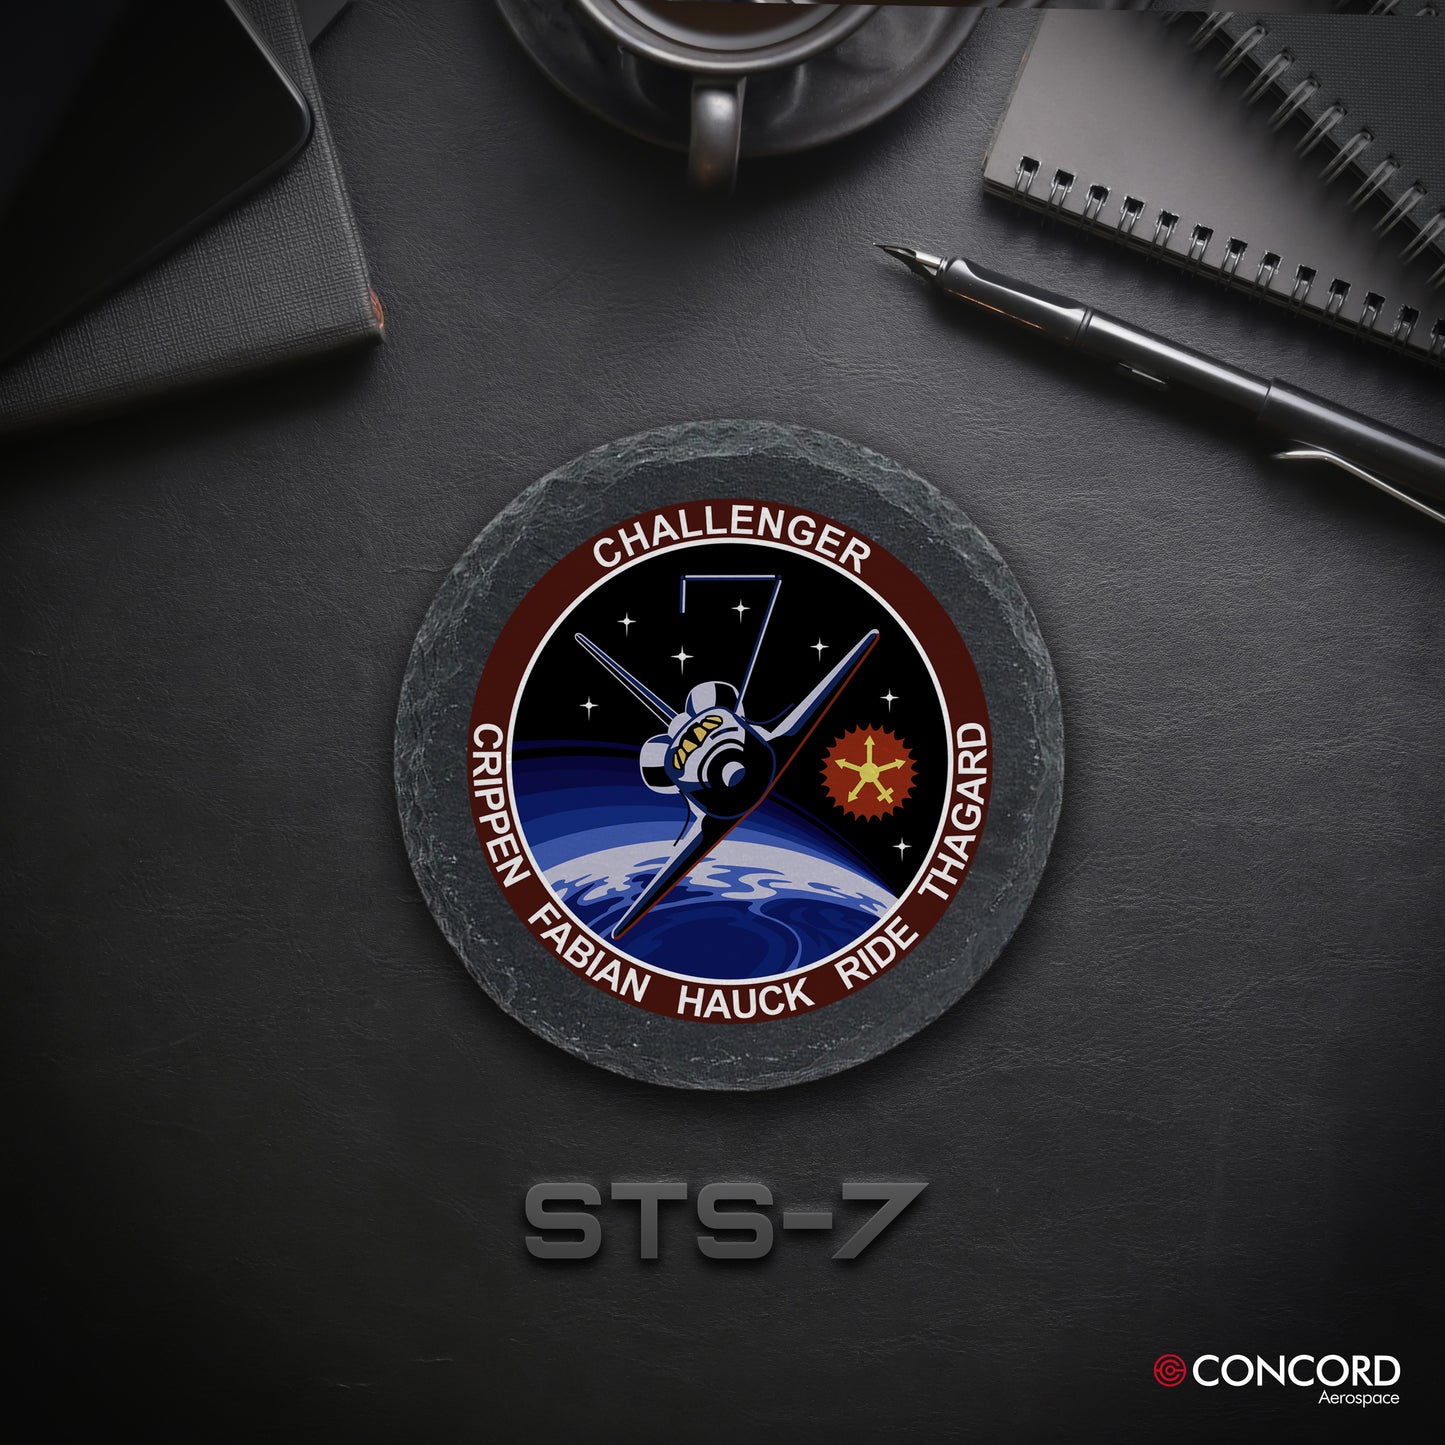 STS - 7 SPACE SHUTTLE - SLATE COASTER - Concord Aerospace Concord Aerospace Concord Aerospace Coasters